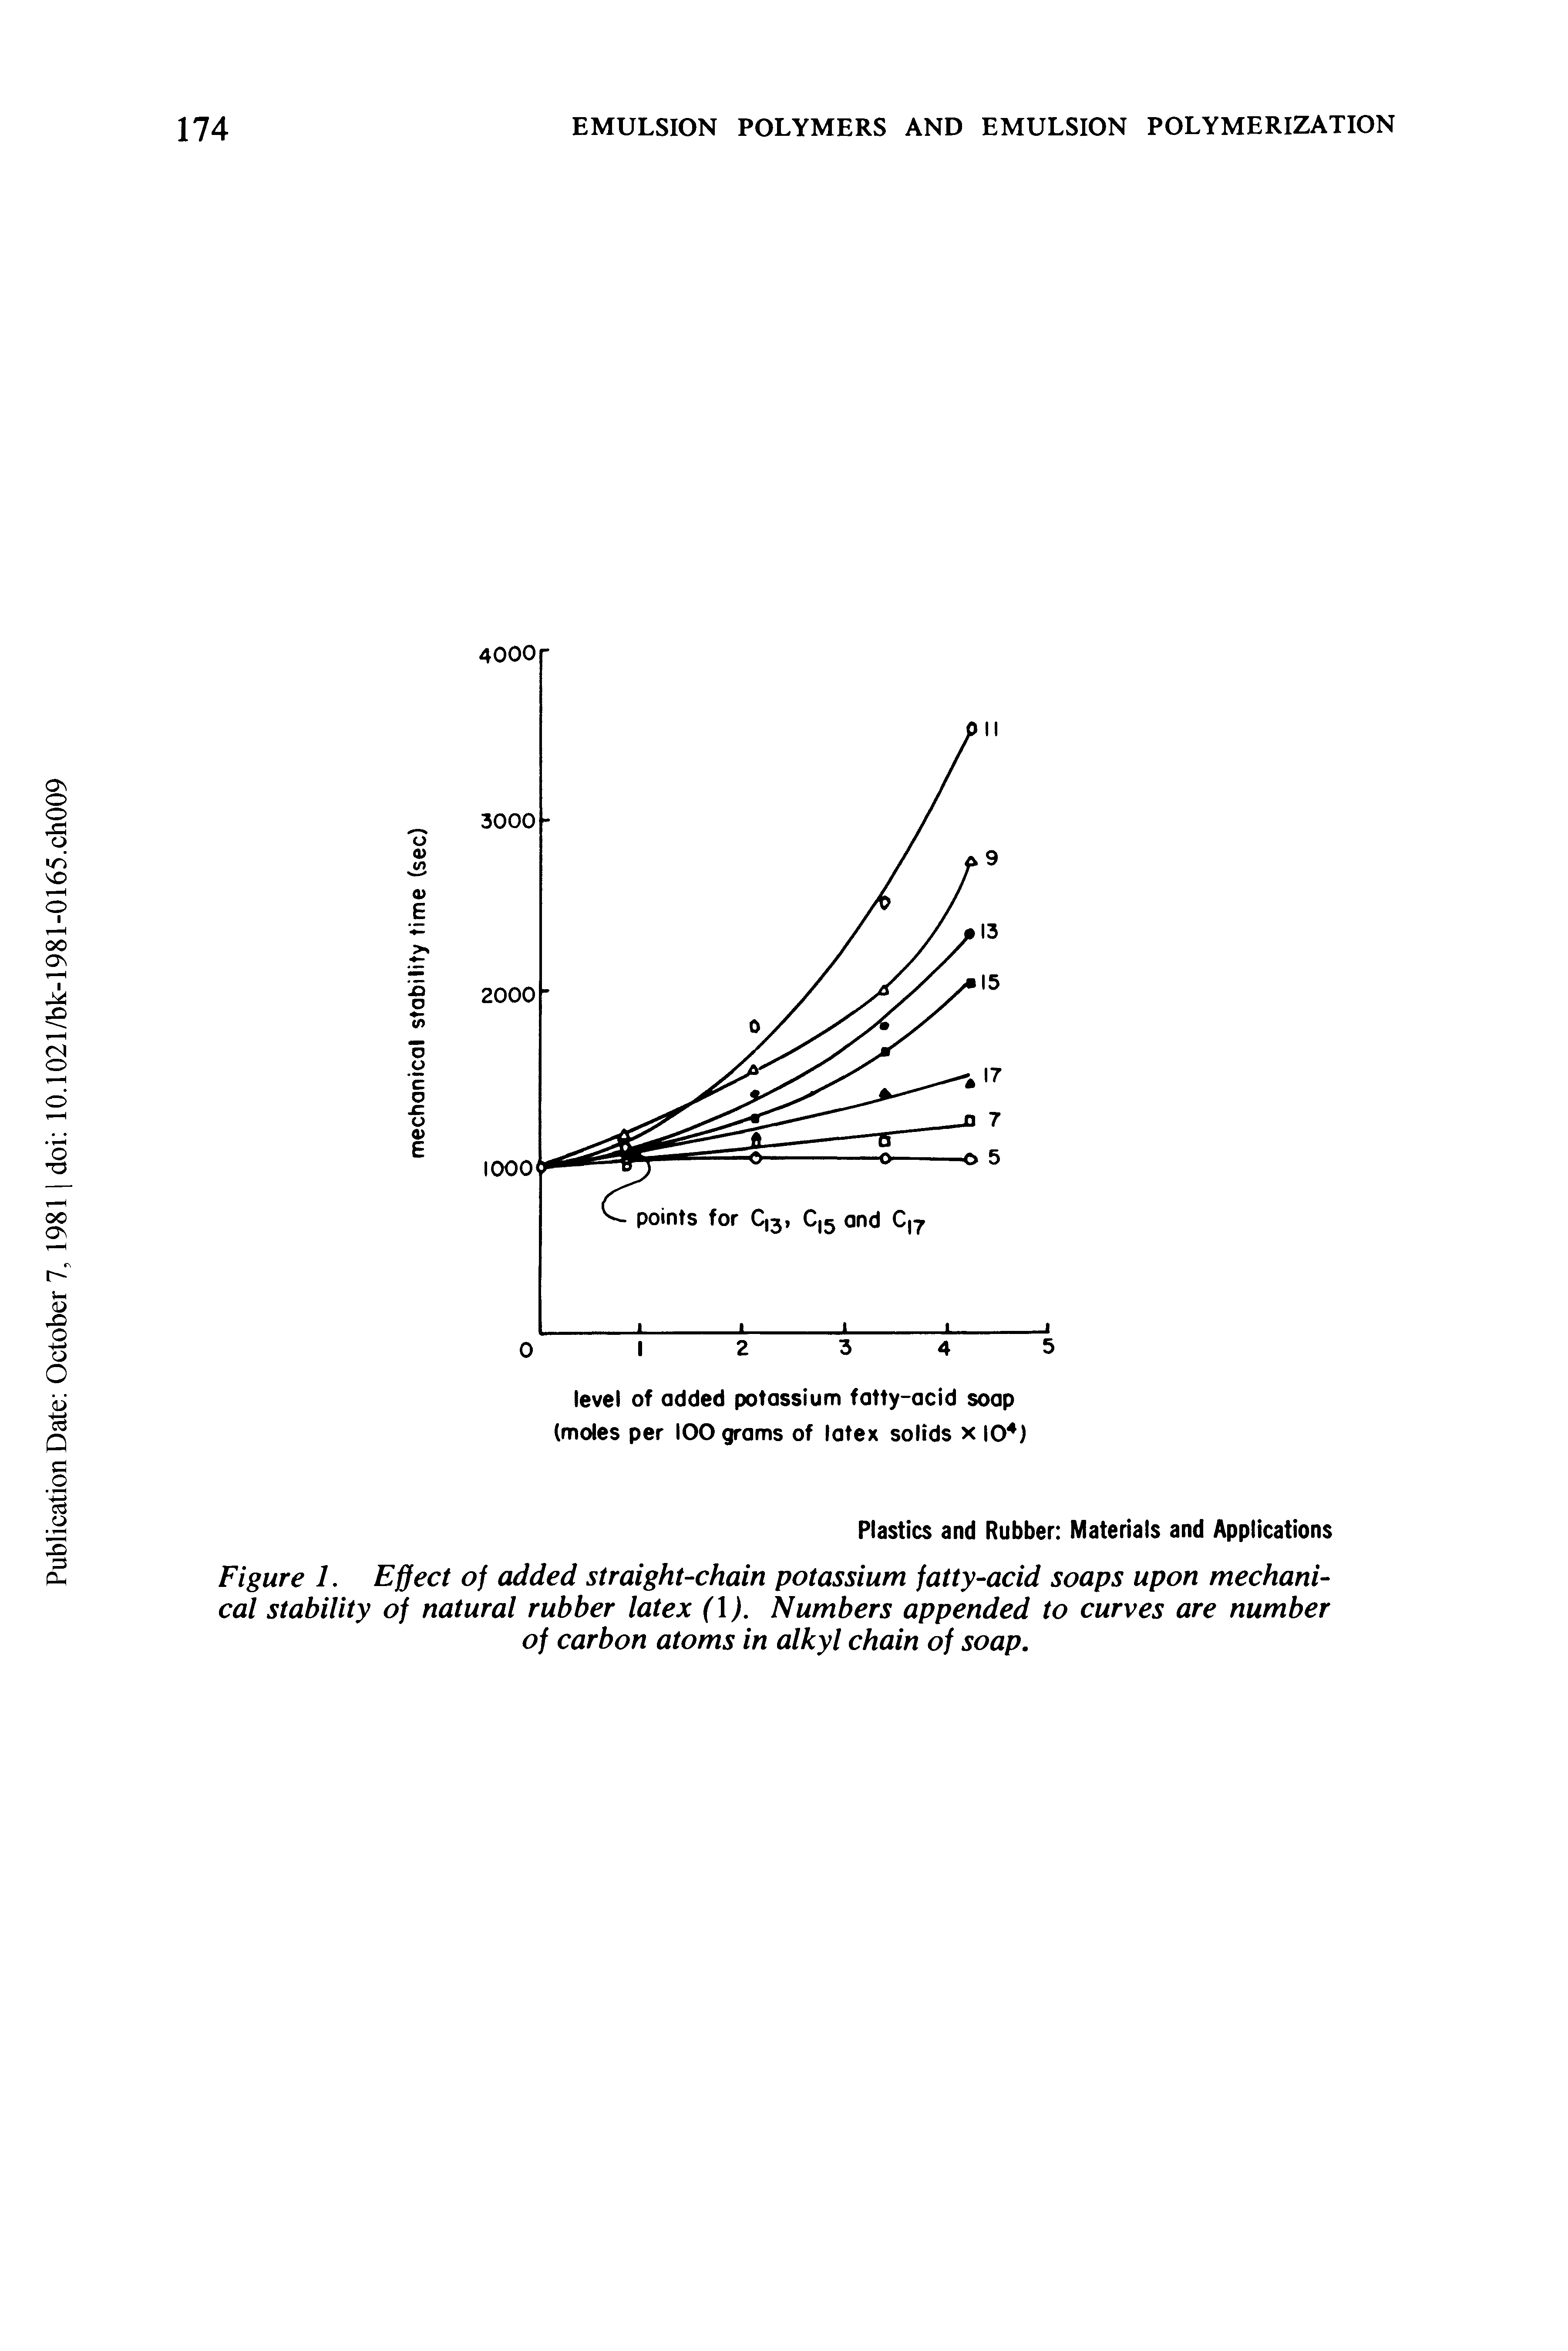 Figure 1. Effect of added straight-chain potassium fatty-acid soaps upon mechanical stability of natural rubber latex (1). Numbers appended to curves are number of carbon atoms in alkyl chain of soap.